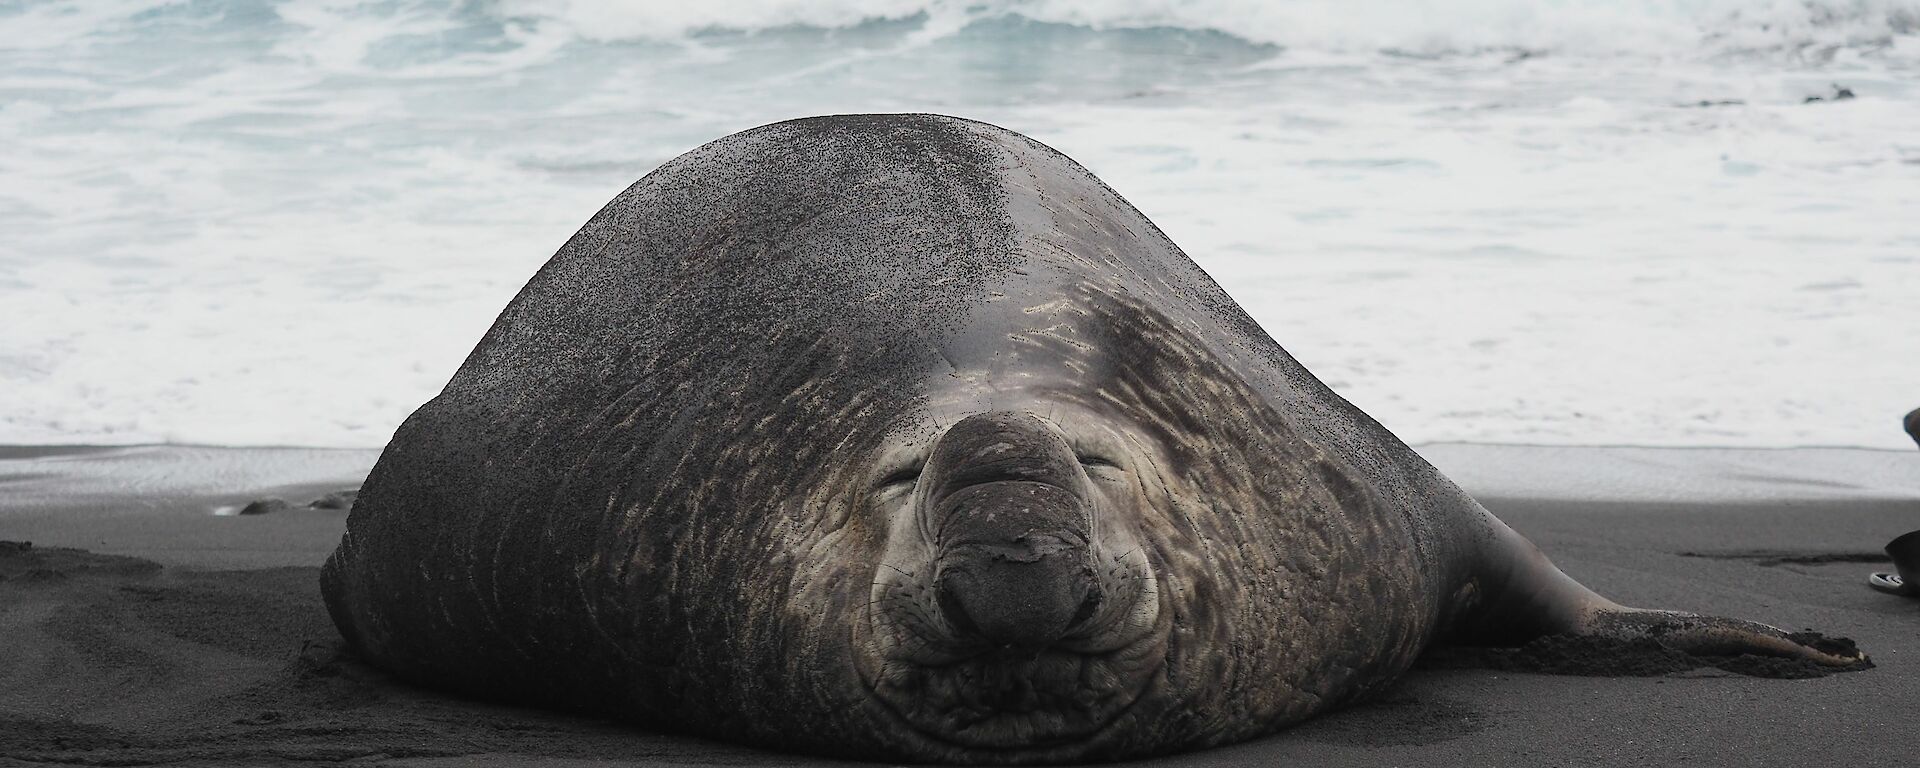 A large male elephant seal with a scar down it’s back is laying flat on the beach